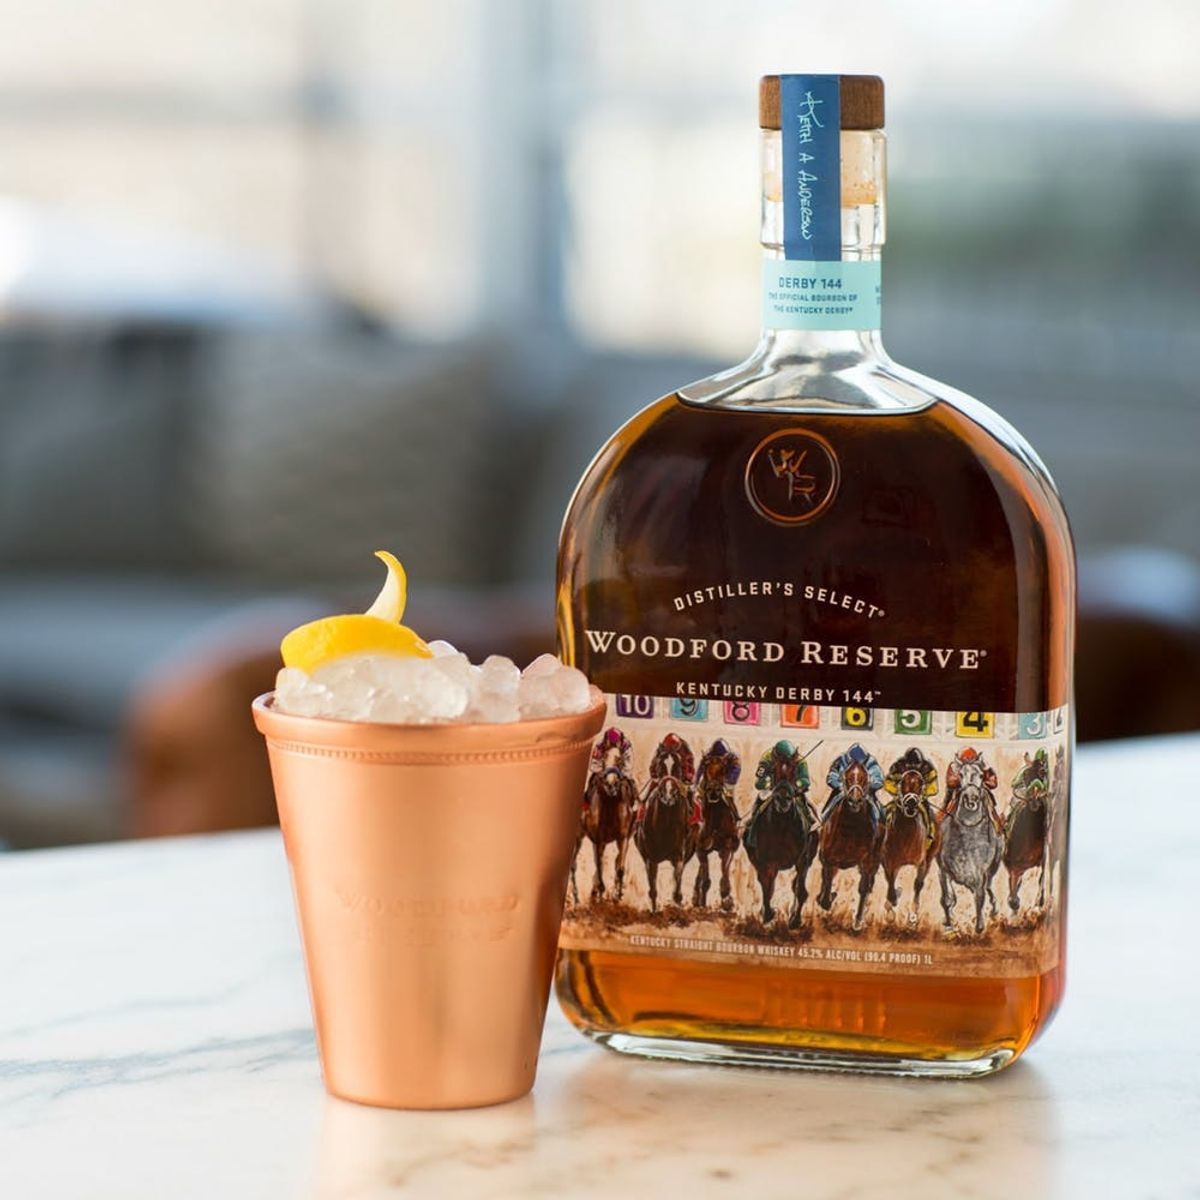 The Official 2018 Kentucky Derby Cocktail Recipes Are Here